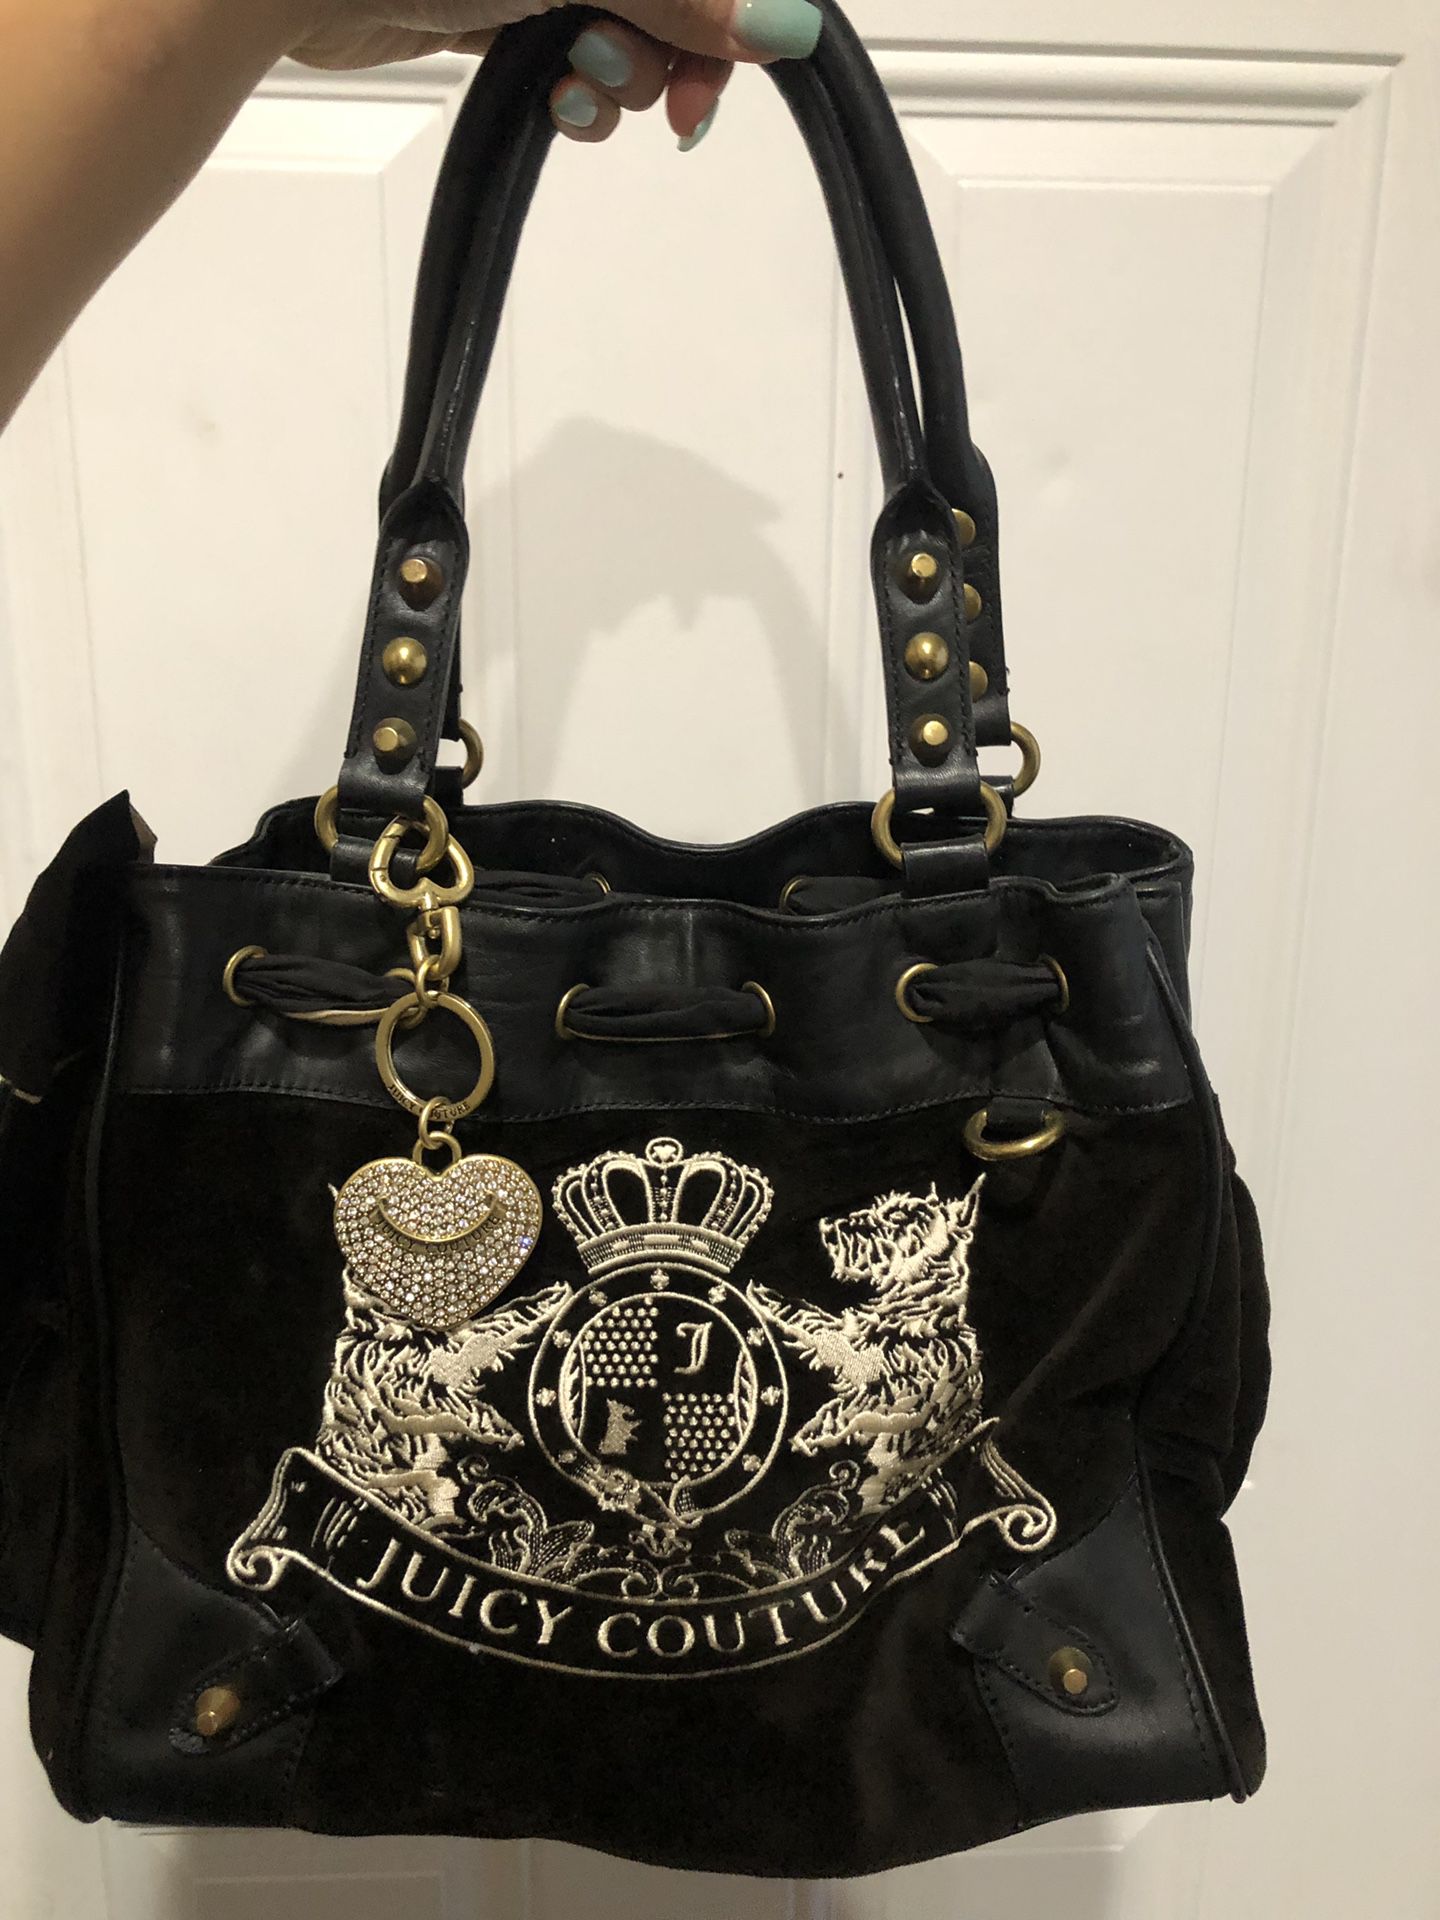 JUICY COUTURE HAND BAG